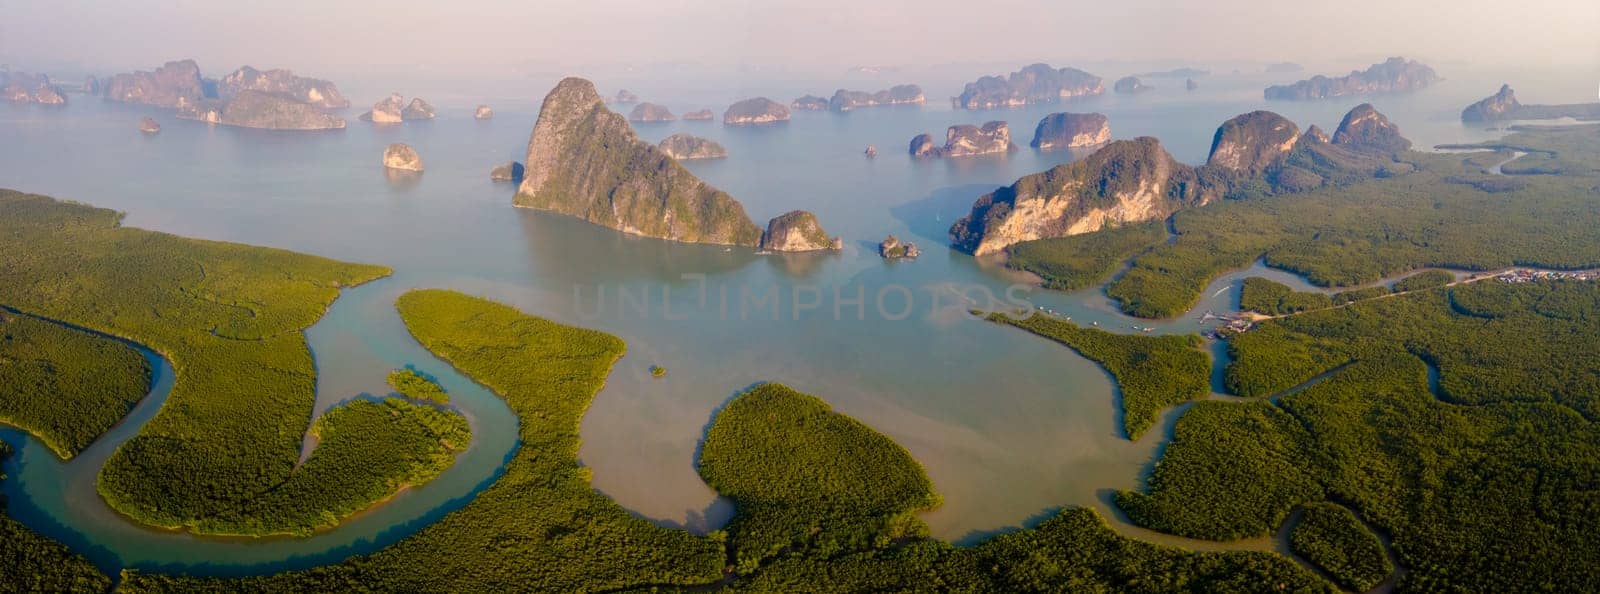 Sametnangshe viewpoint of mountains in Phangnga bay Thailand by fokkebok